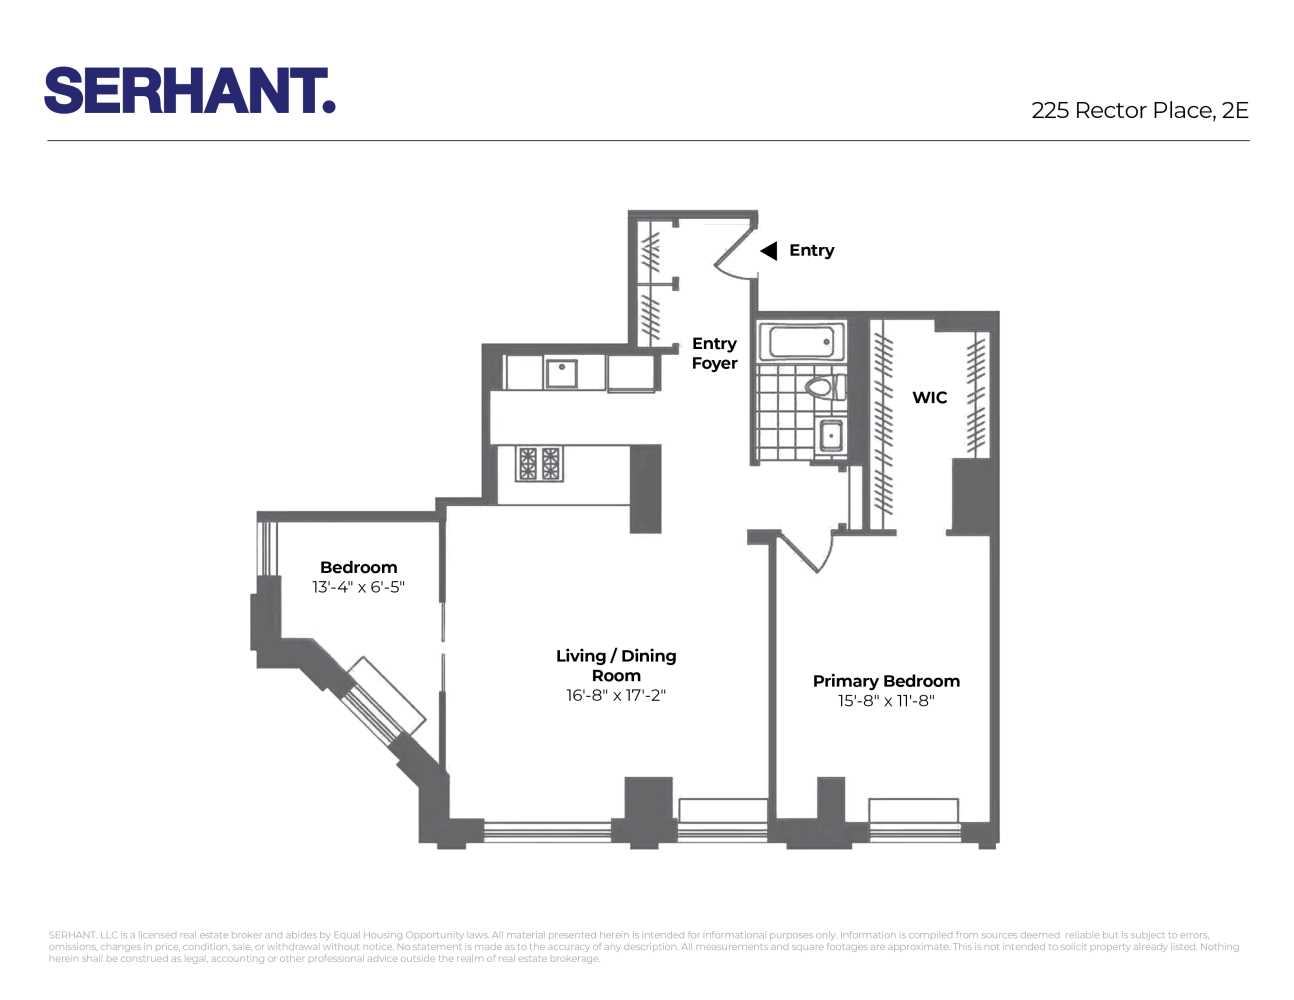 Floorplan for 225 Rector Place, 2E